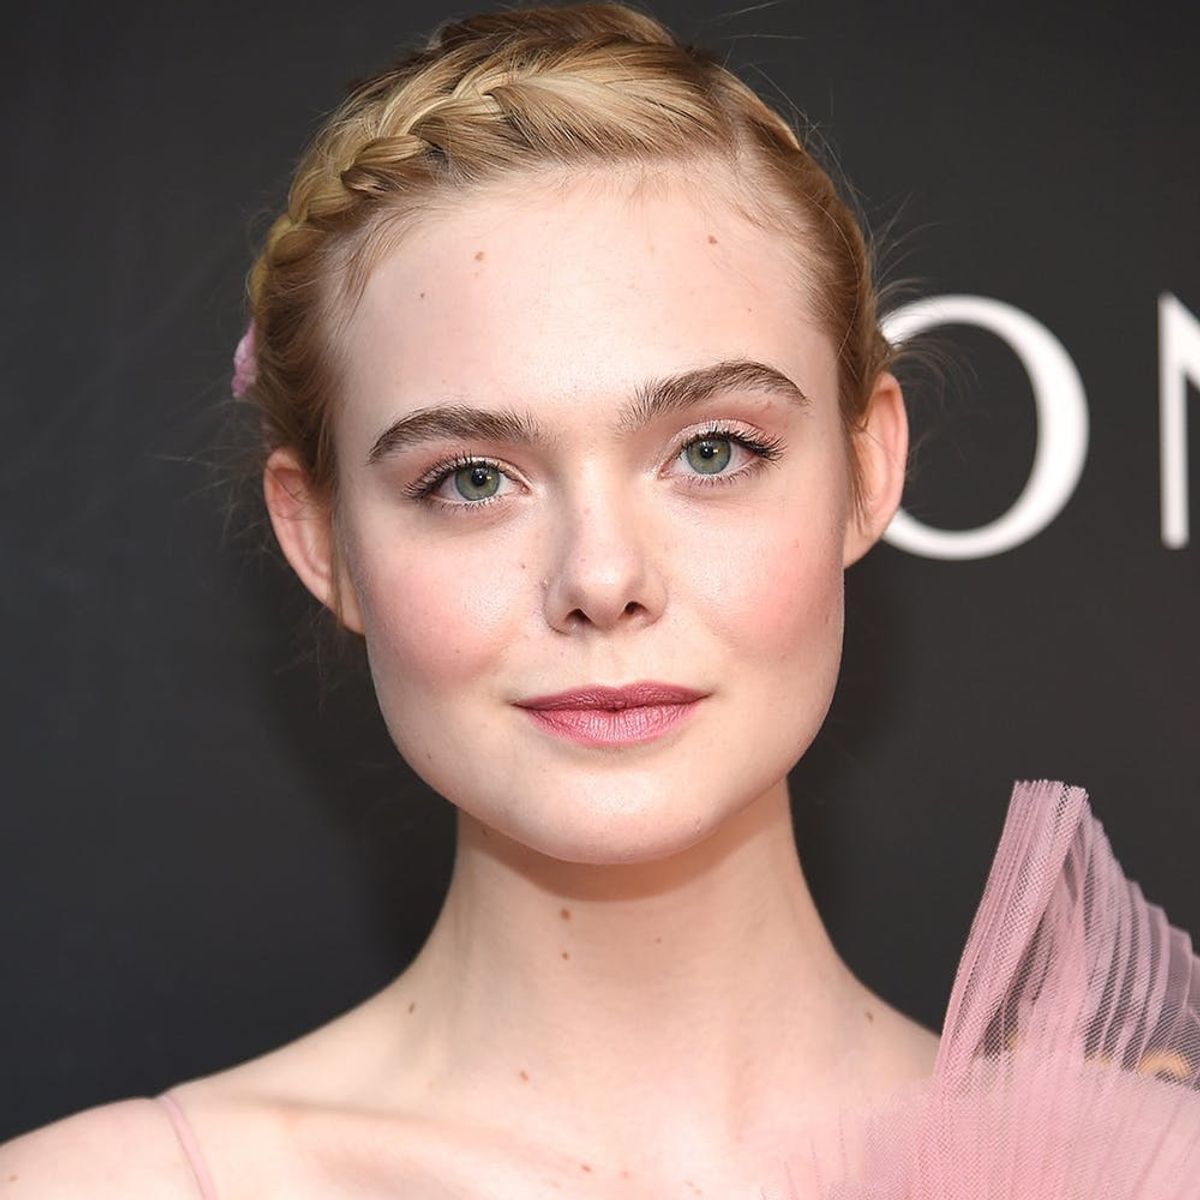 Elle Fanning Just Debuted a Jaw-Dropping Hair Makeover